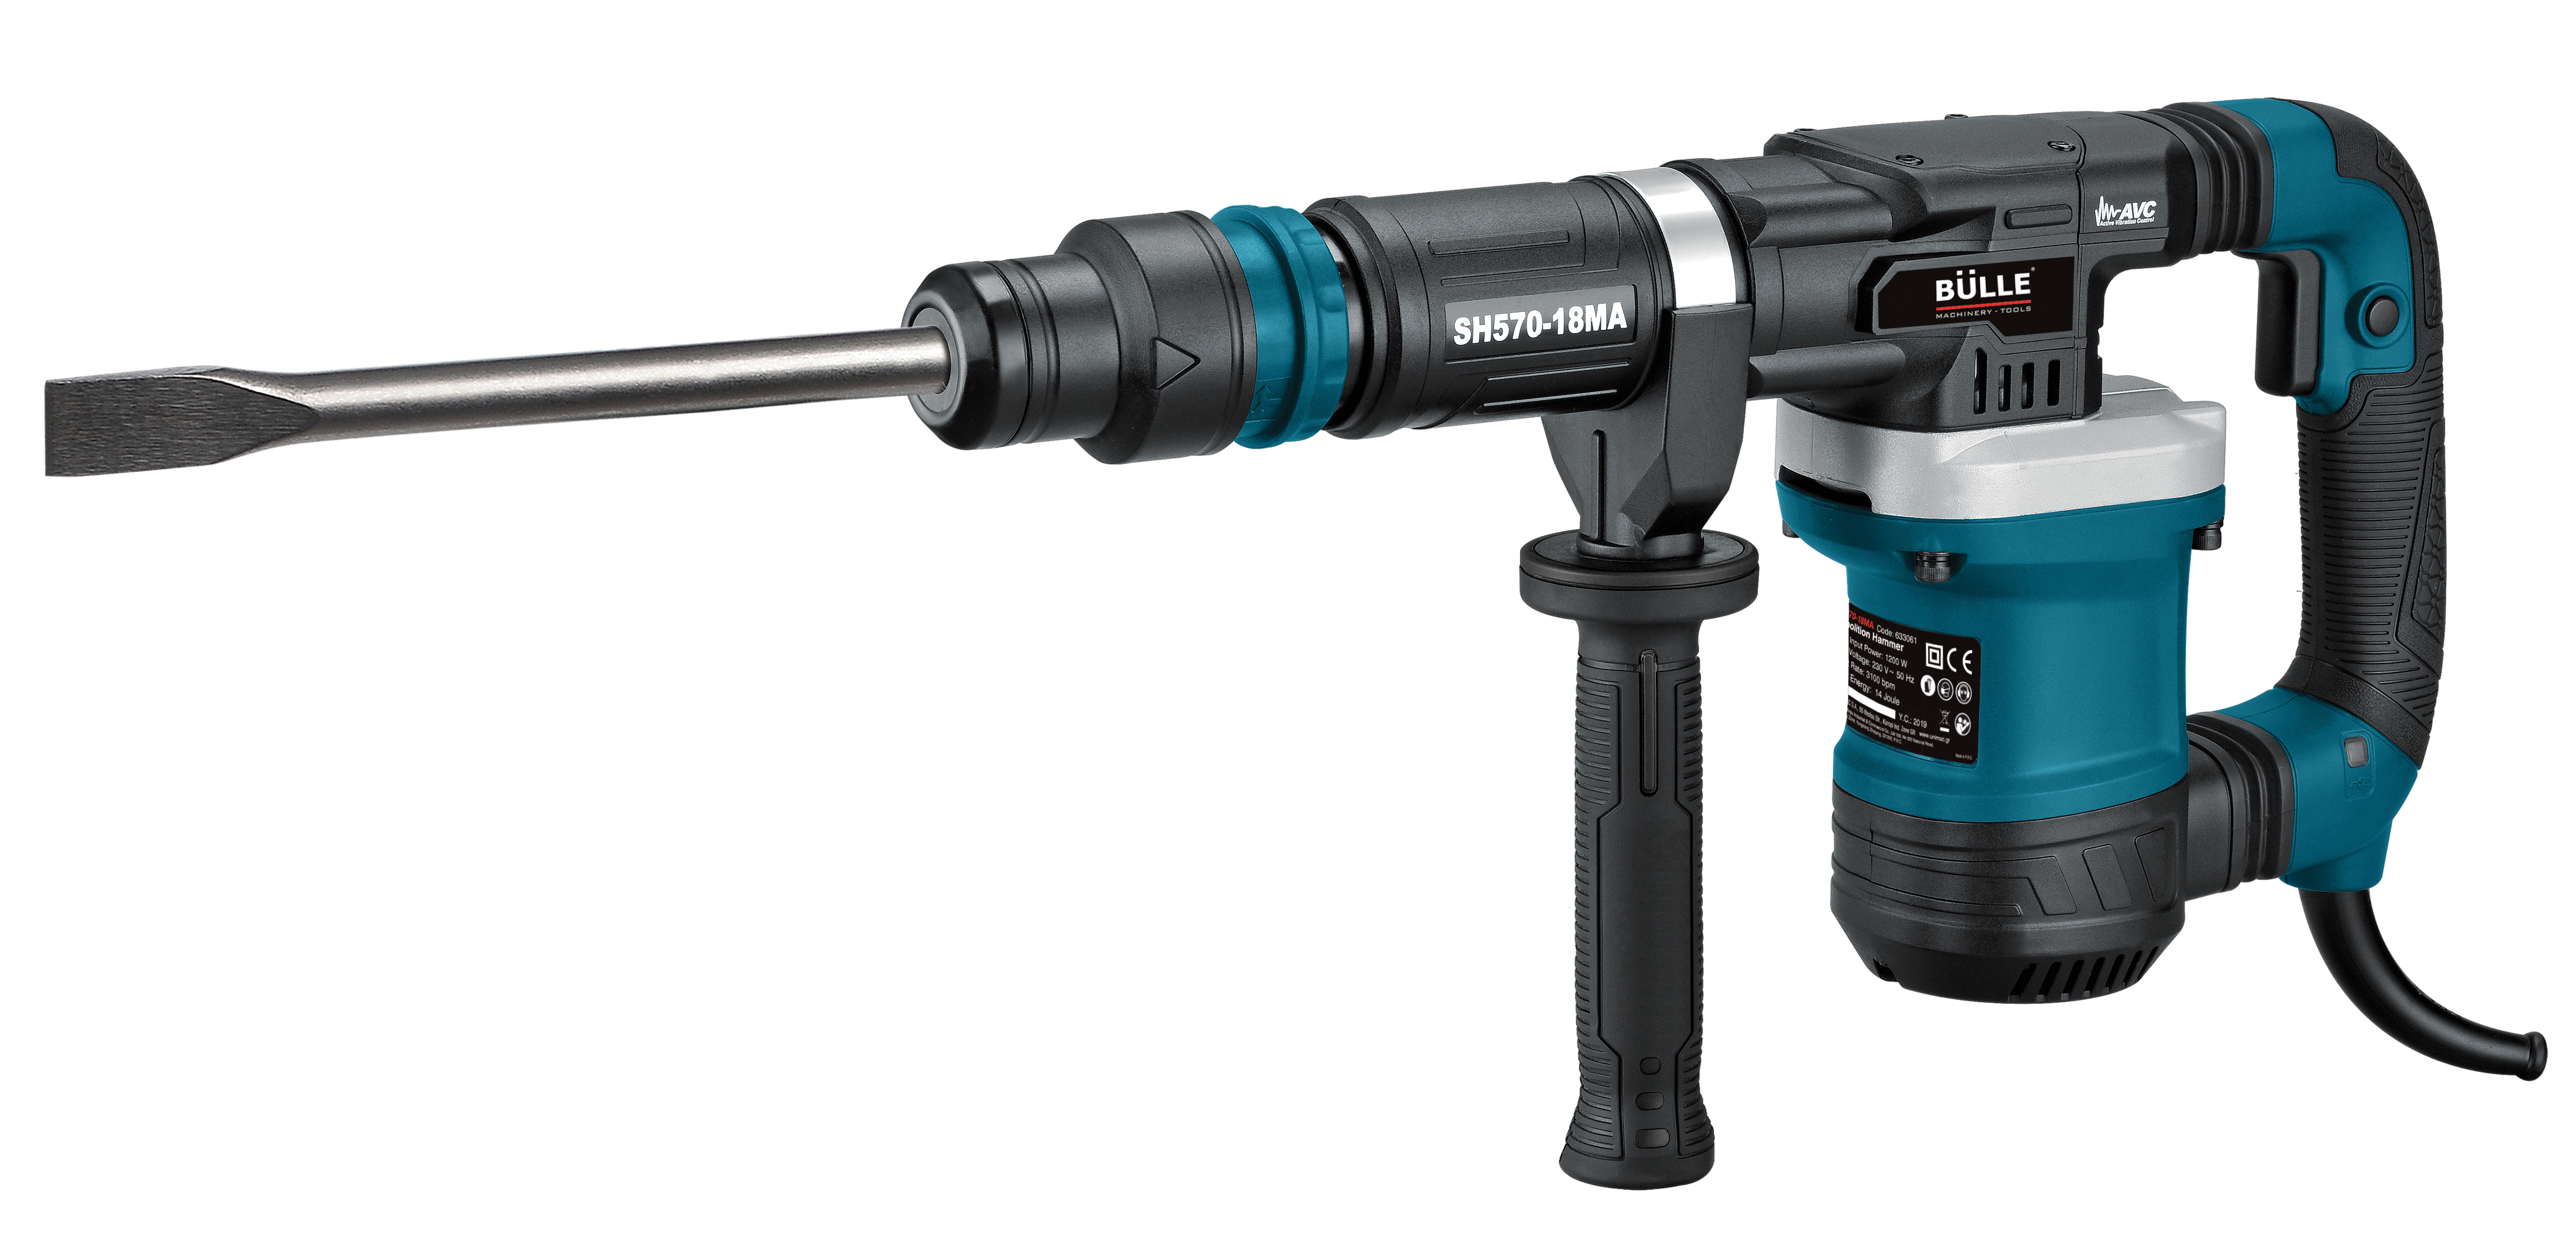 Electric Demolition Hammer Drill 1200W Bulle